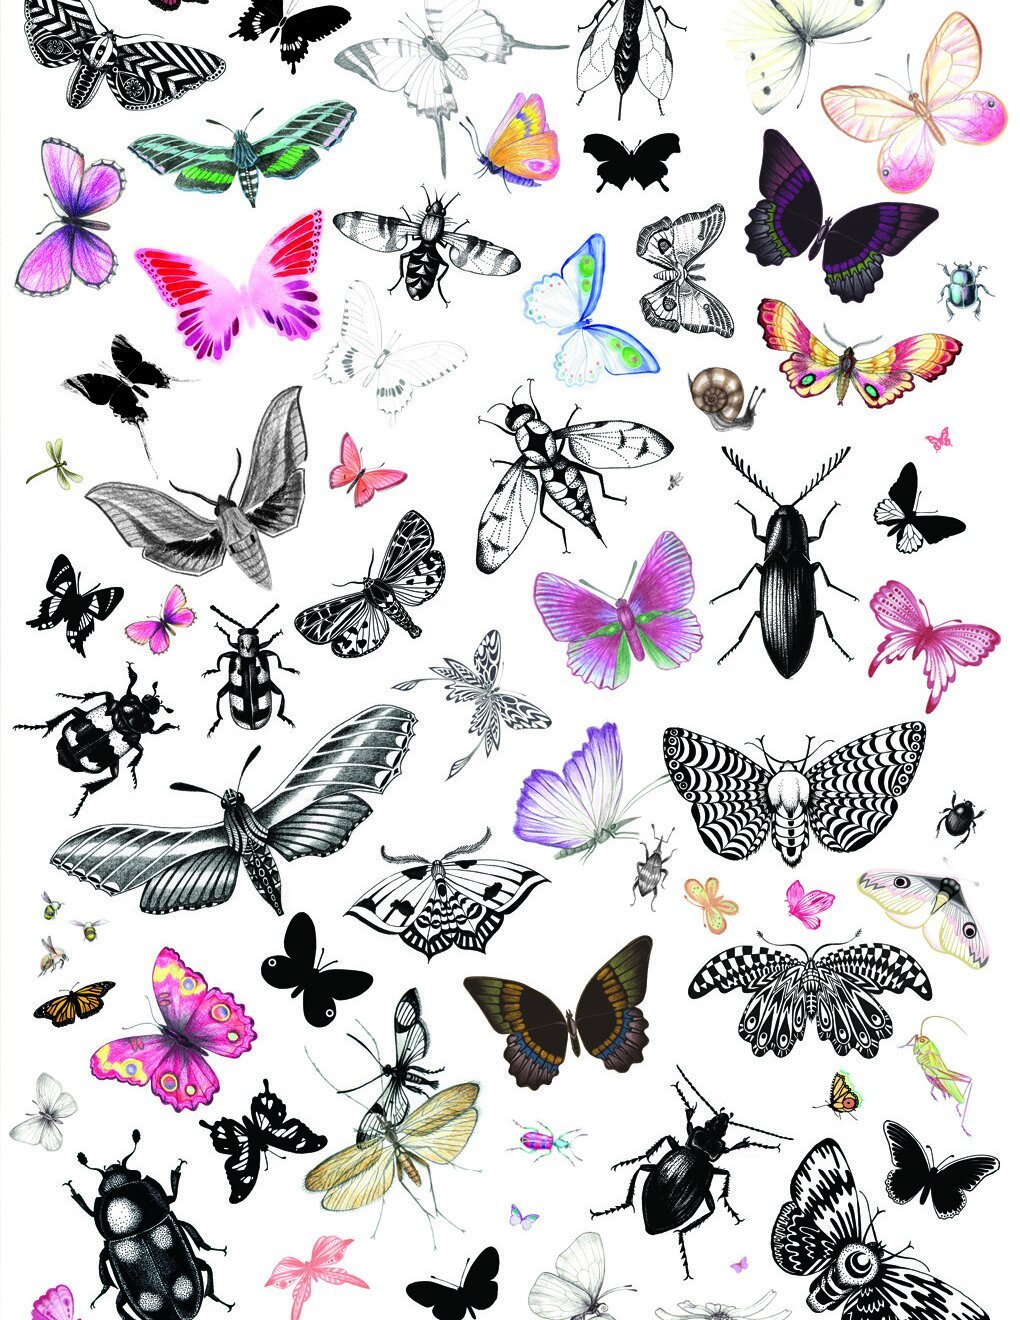 Collage of Insects